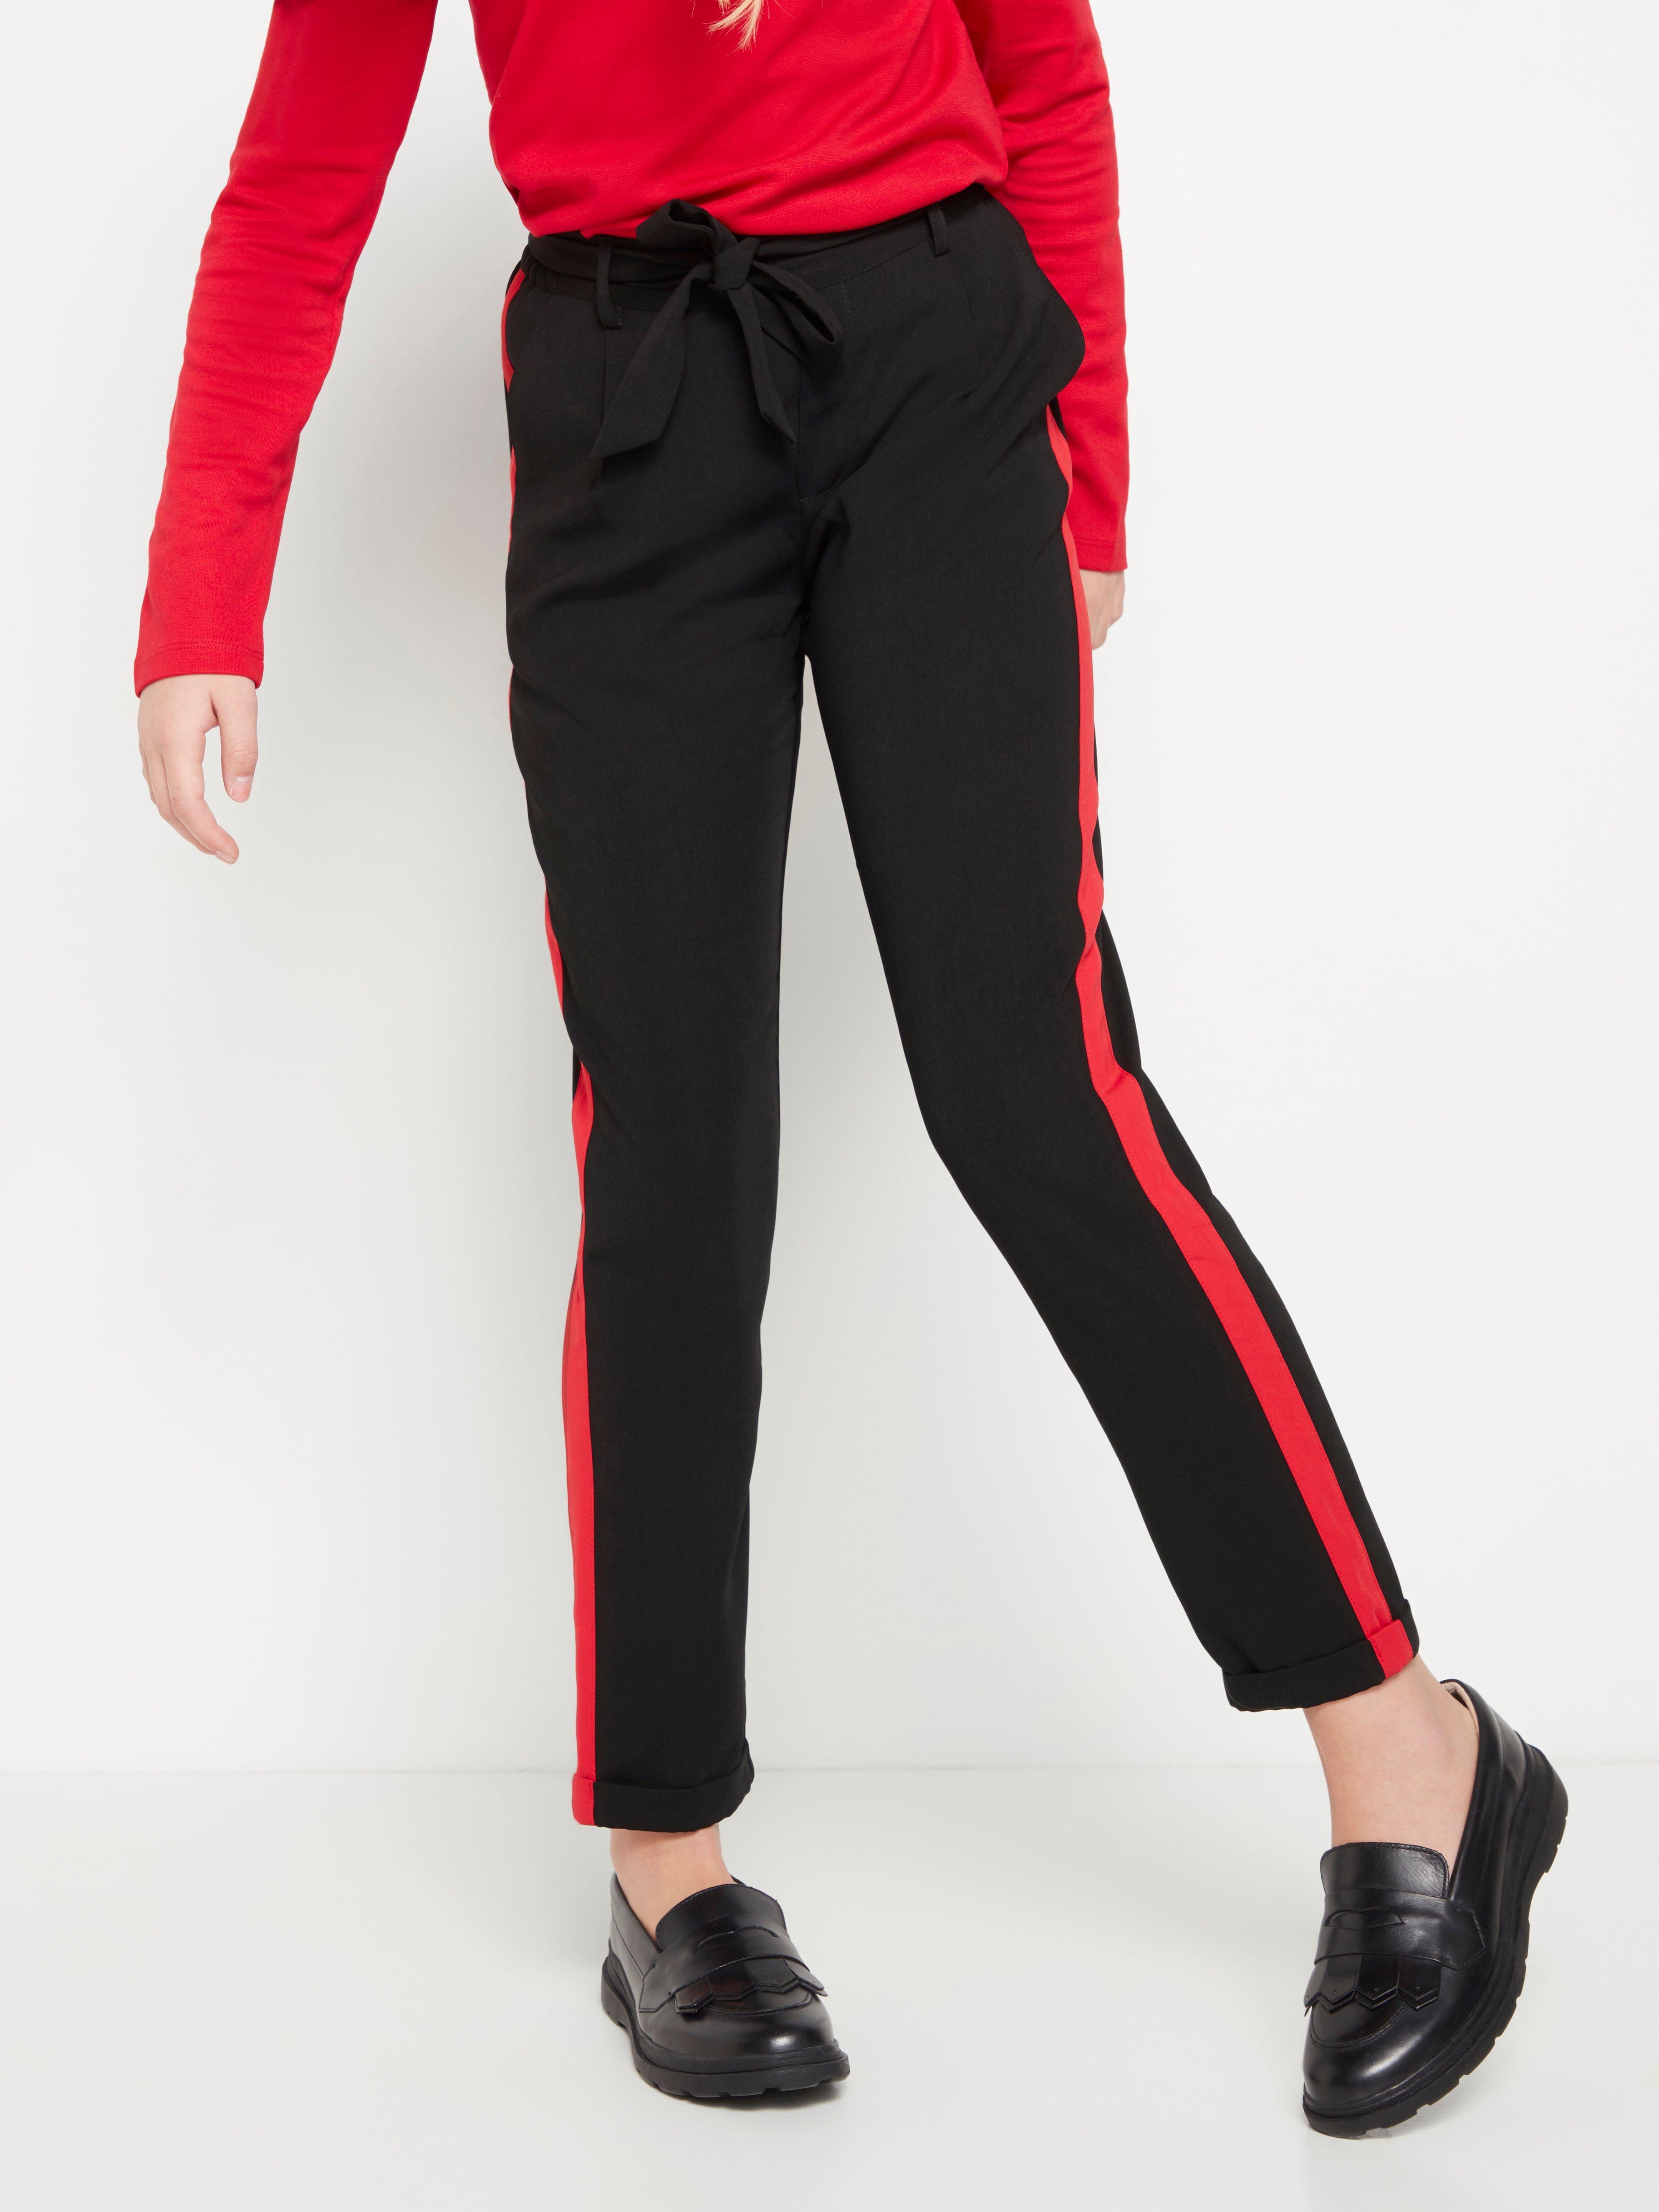 black trousers with red stripe down side